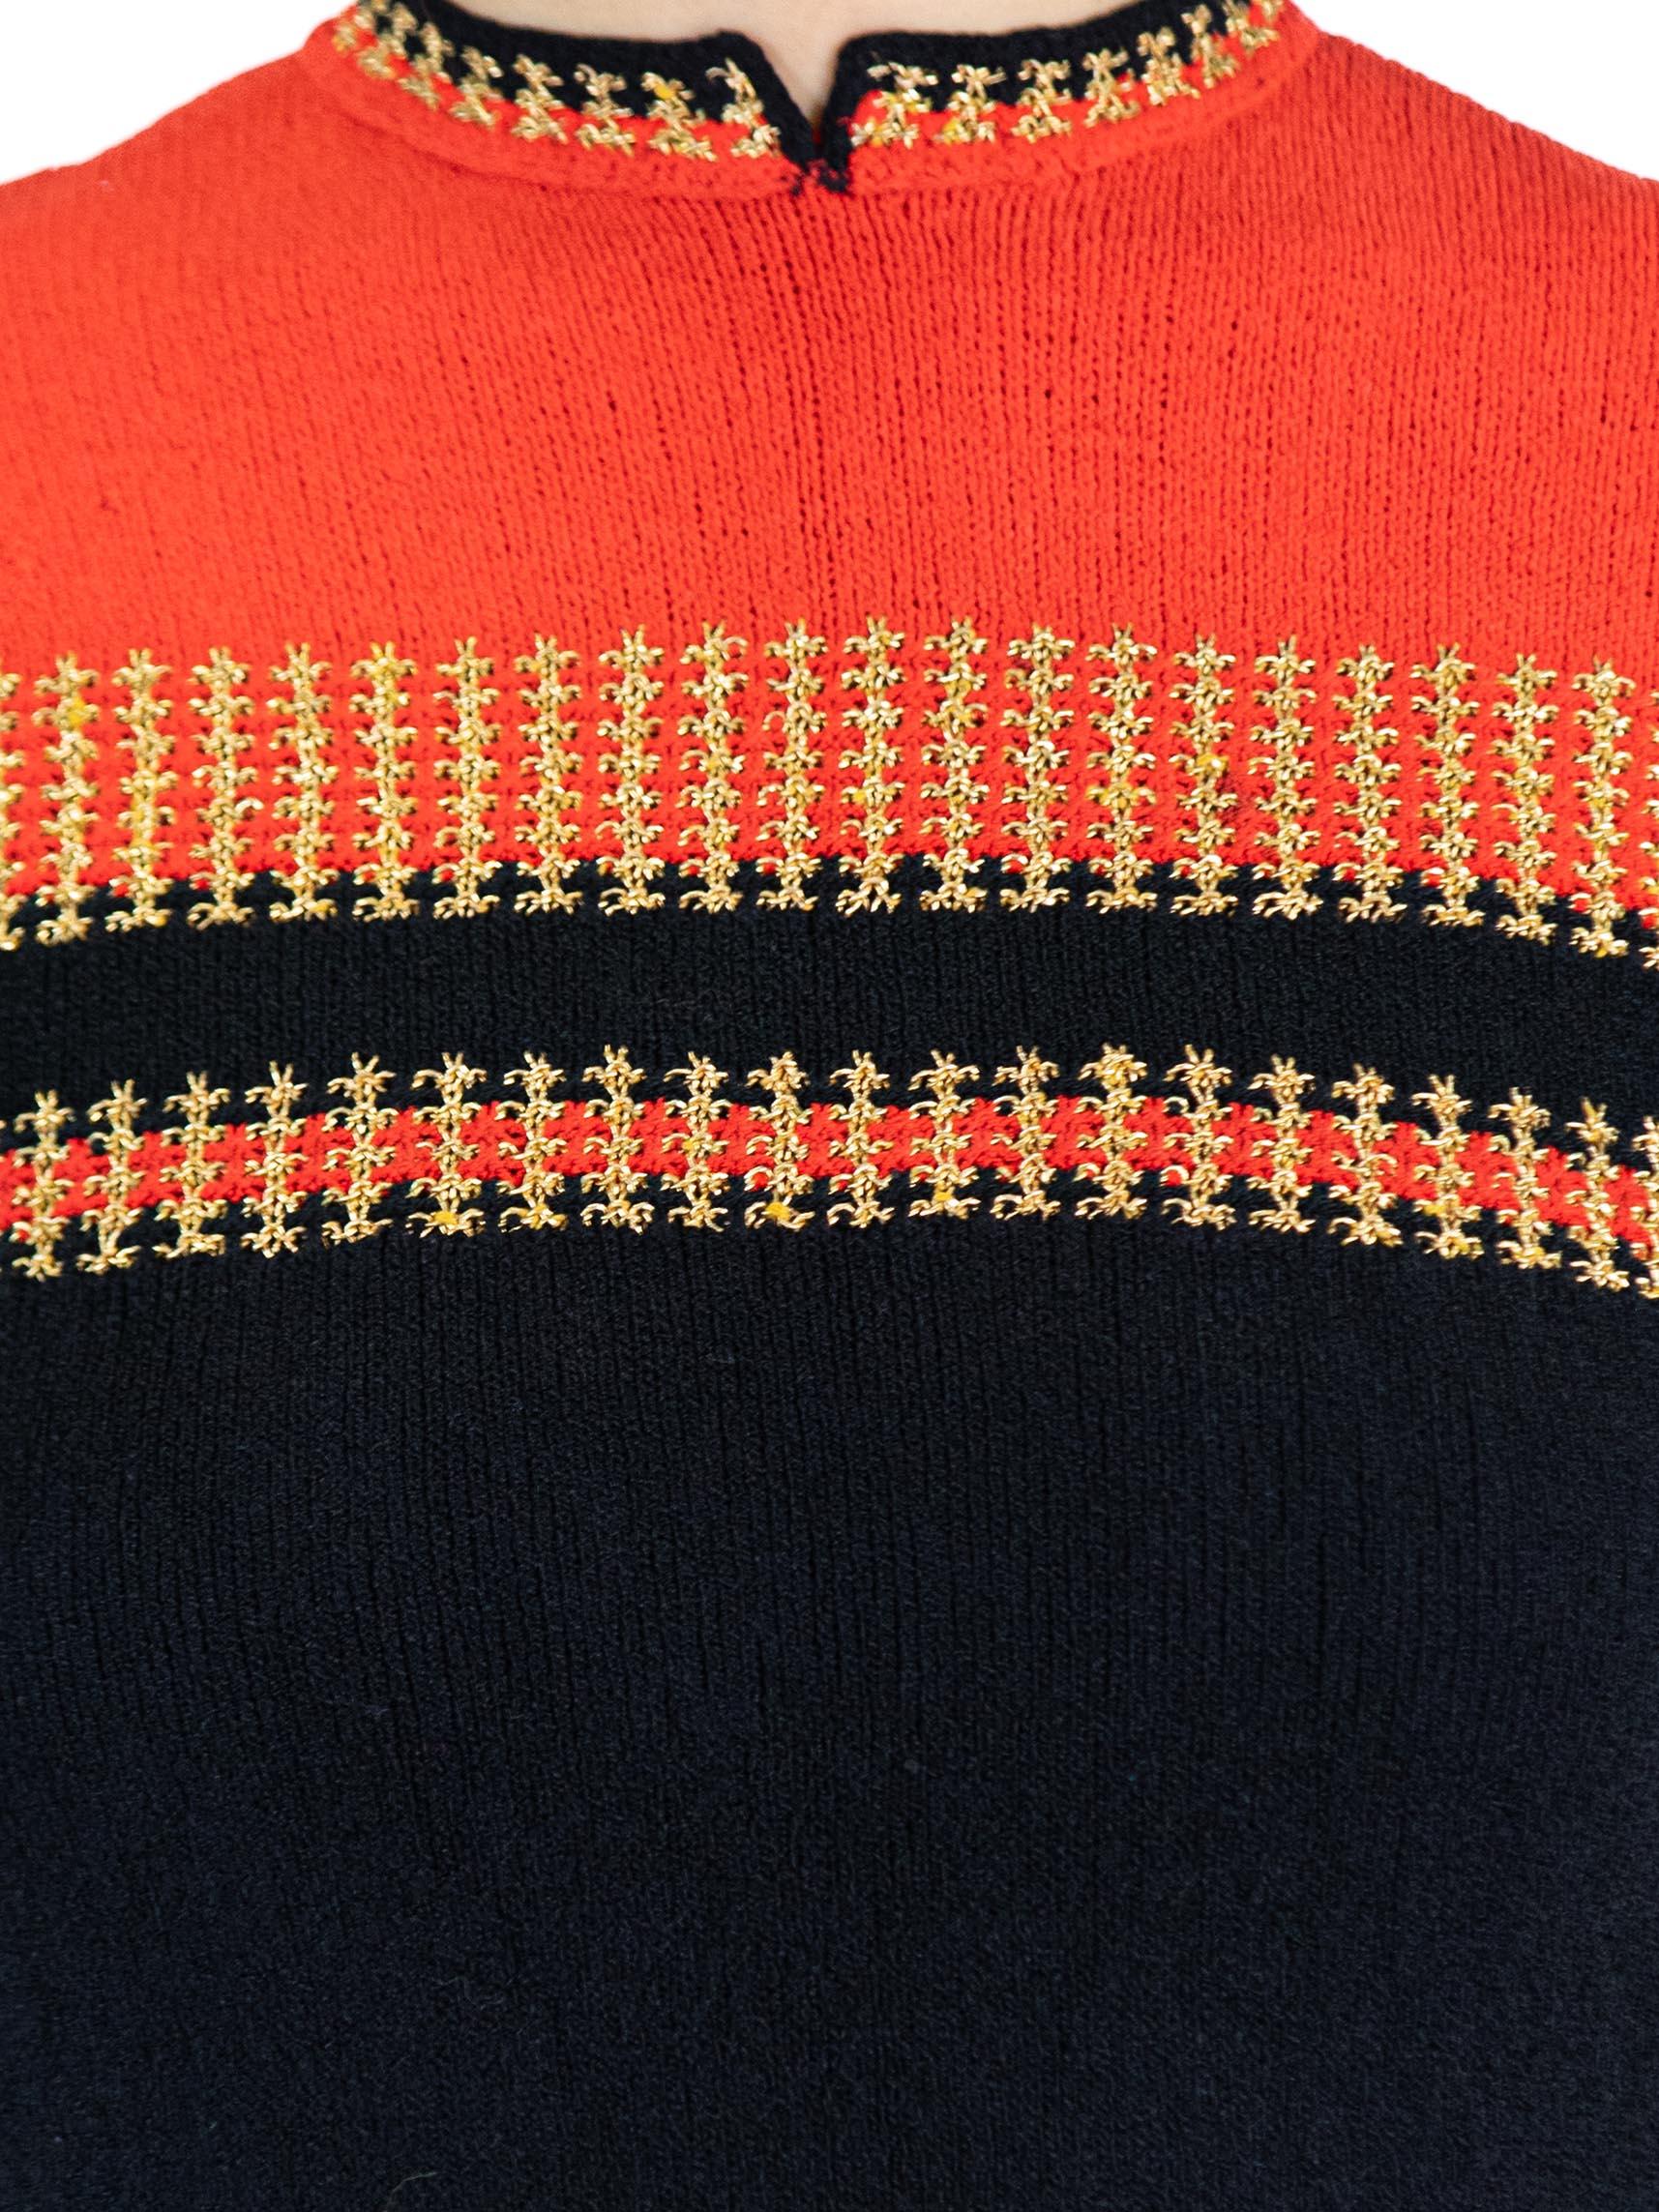 1940S Black & Red Rayon Hand Knit Top With Metallic Gold Details For Sale 1